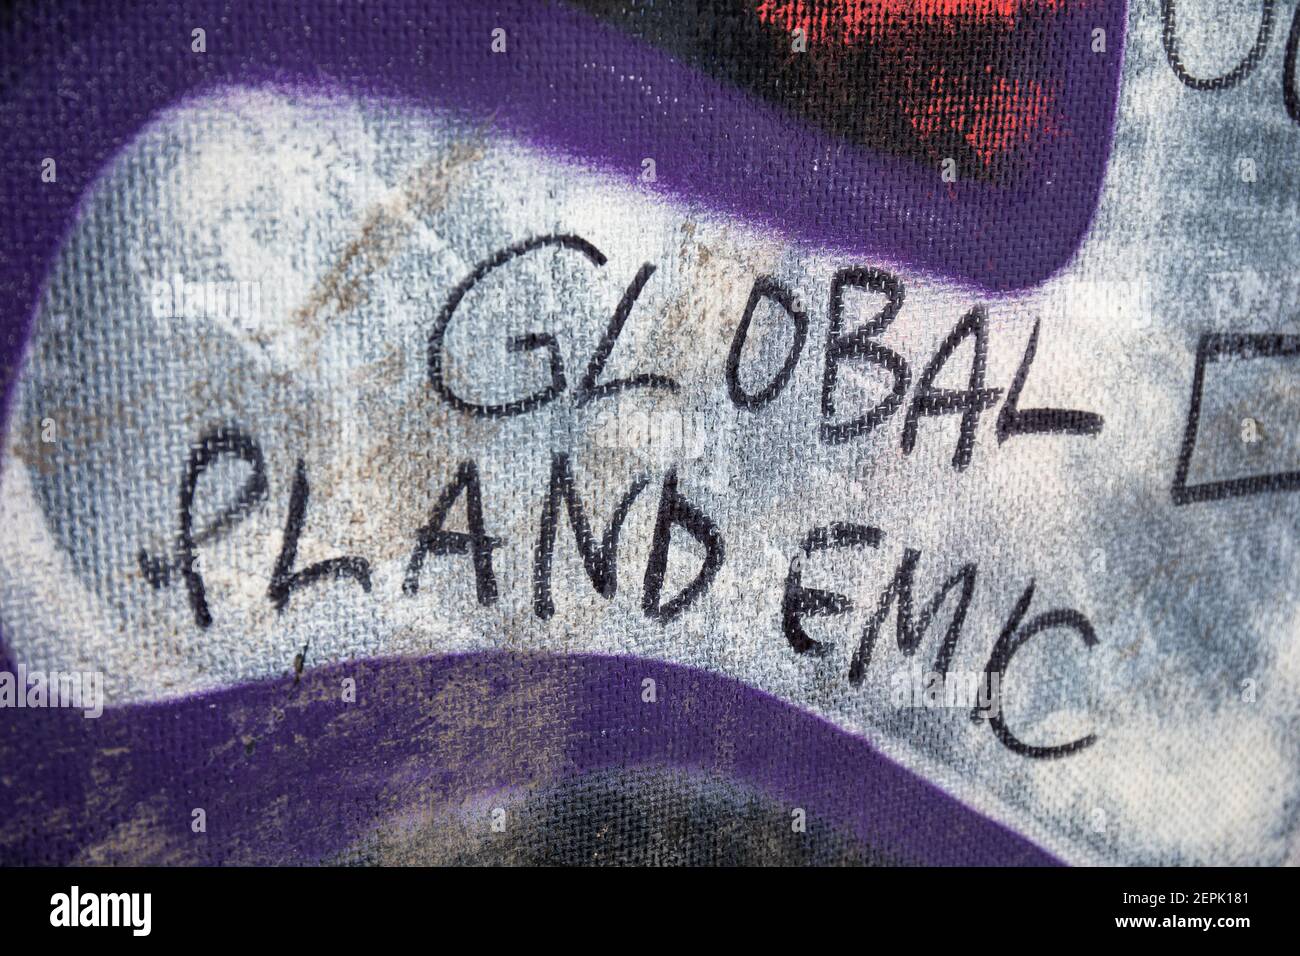 Global plandemic conspiracy theory writing on a wall in Munkkiniemi district of Helsinki, Finland Stock Photo